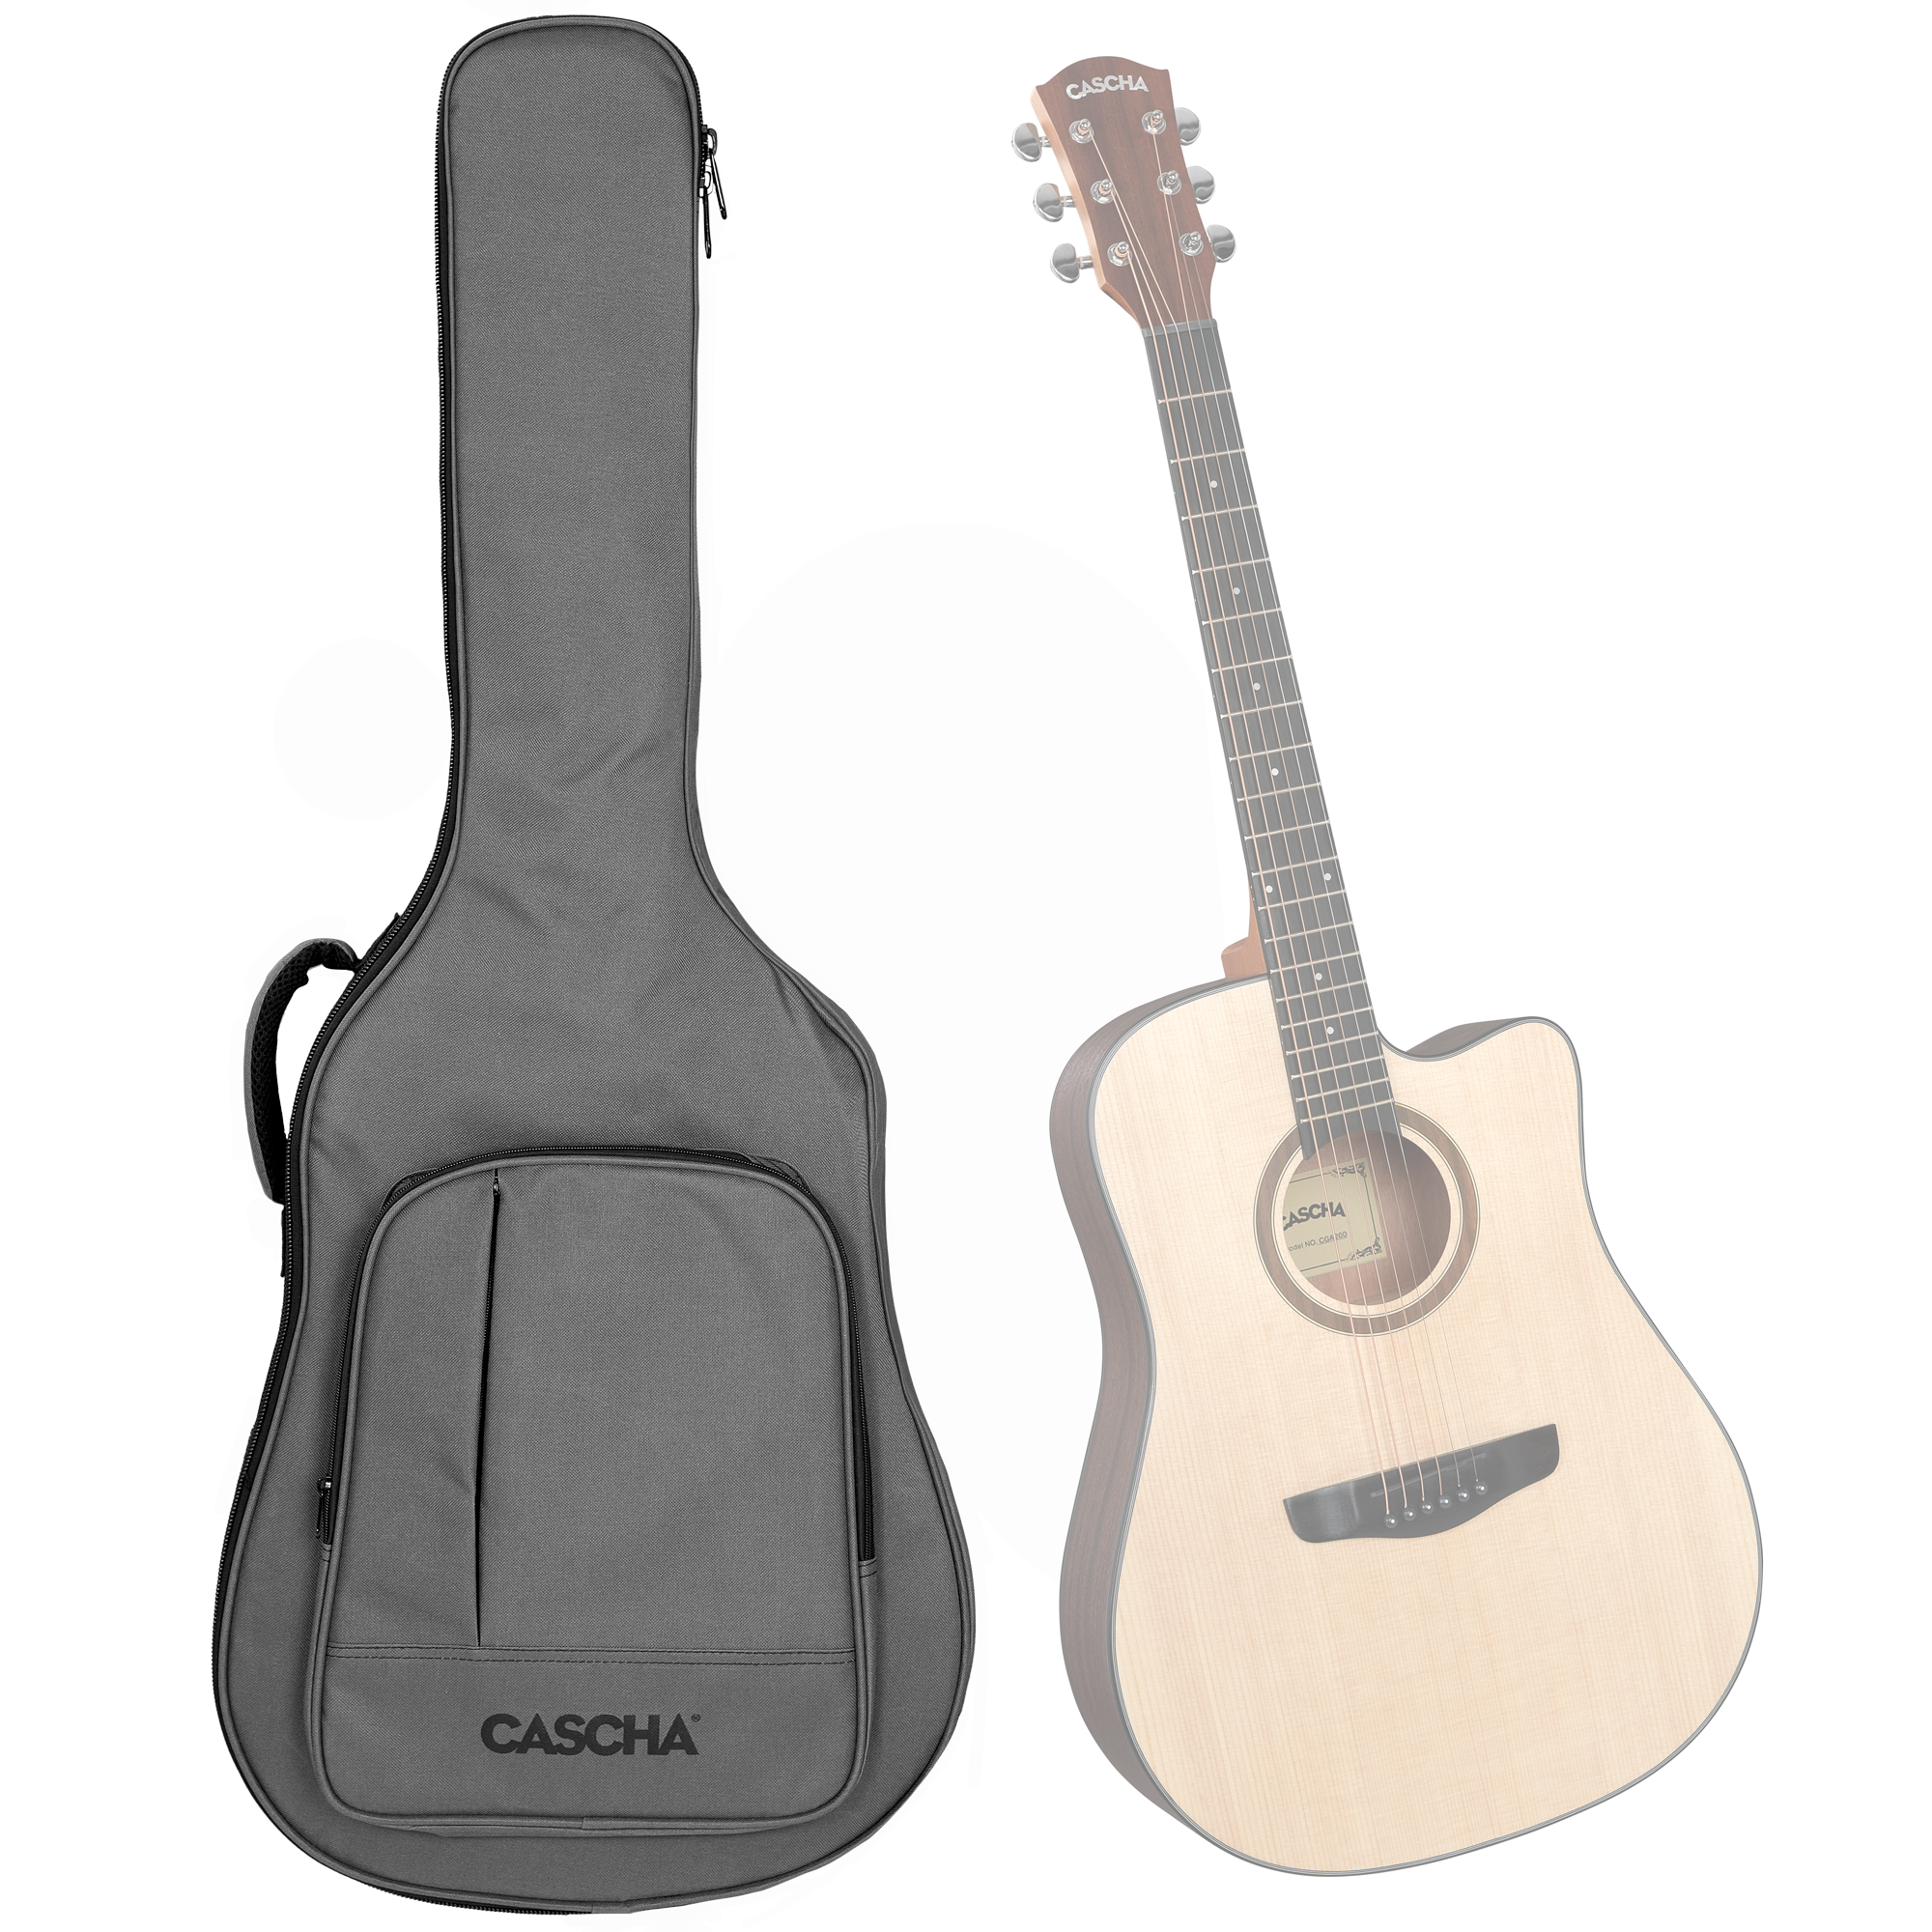 Gigbags for Acoustic Guitar